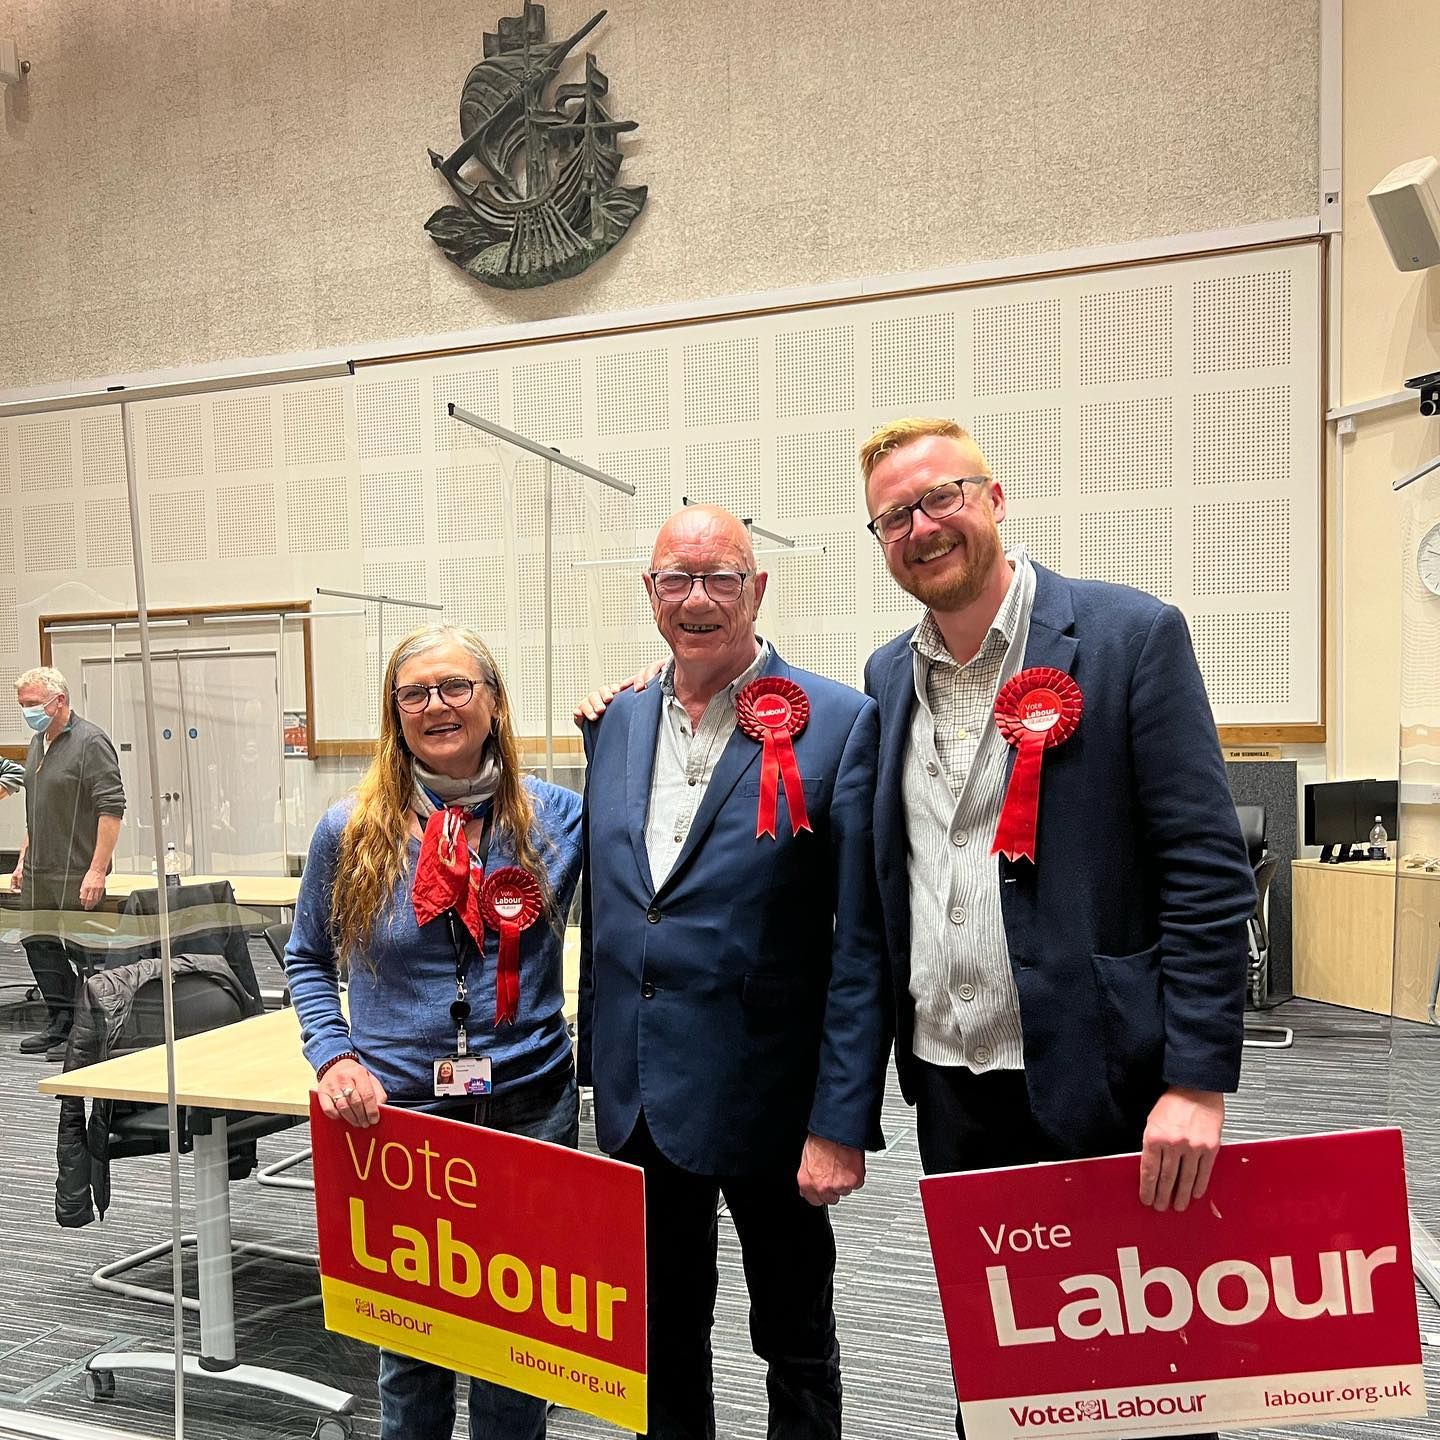 Robert with Carmen Appich and Lloyd Russell-Moyle MP the night of his win.